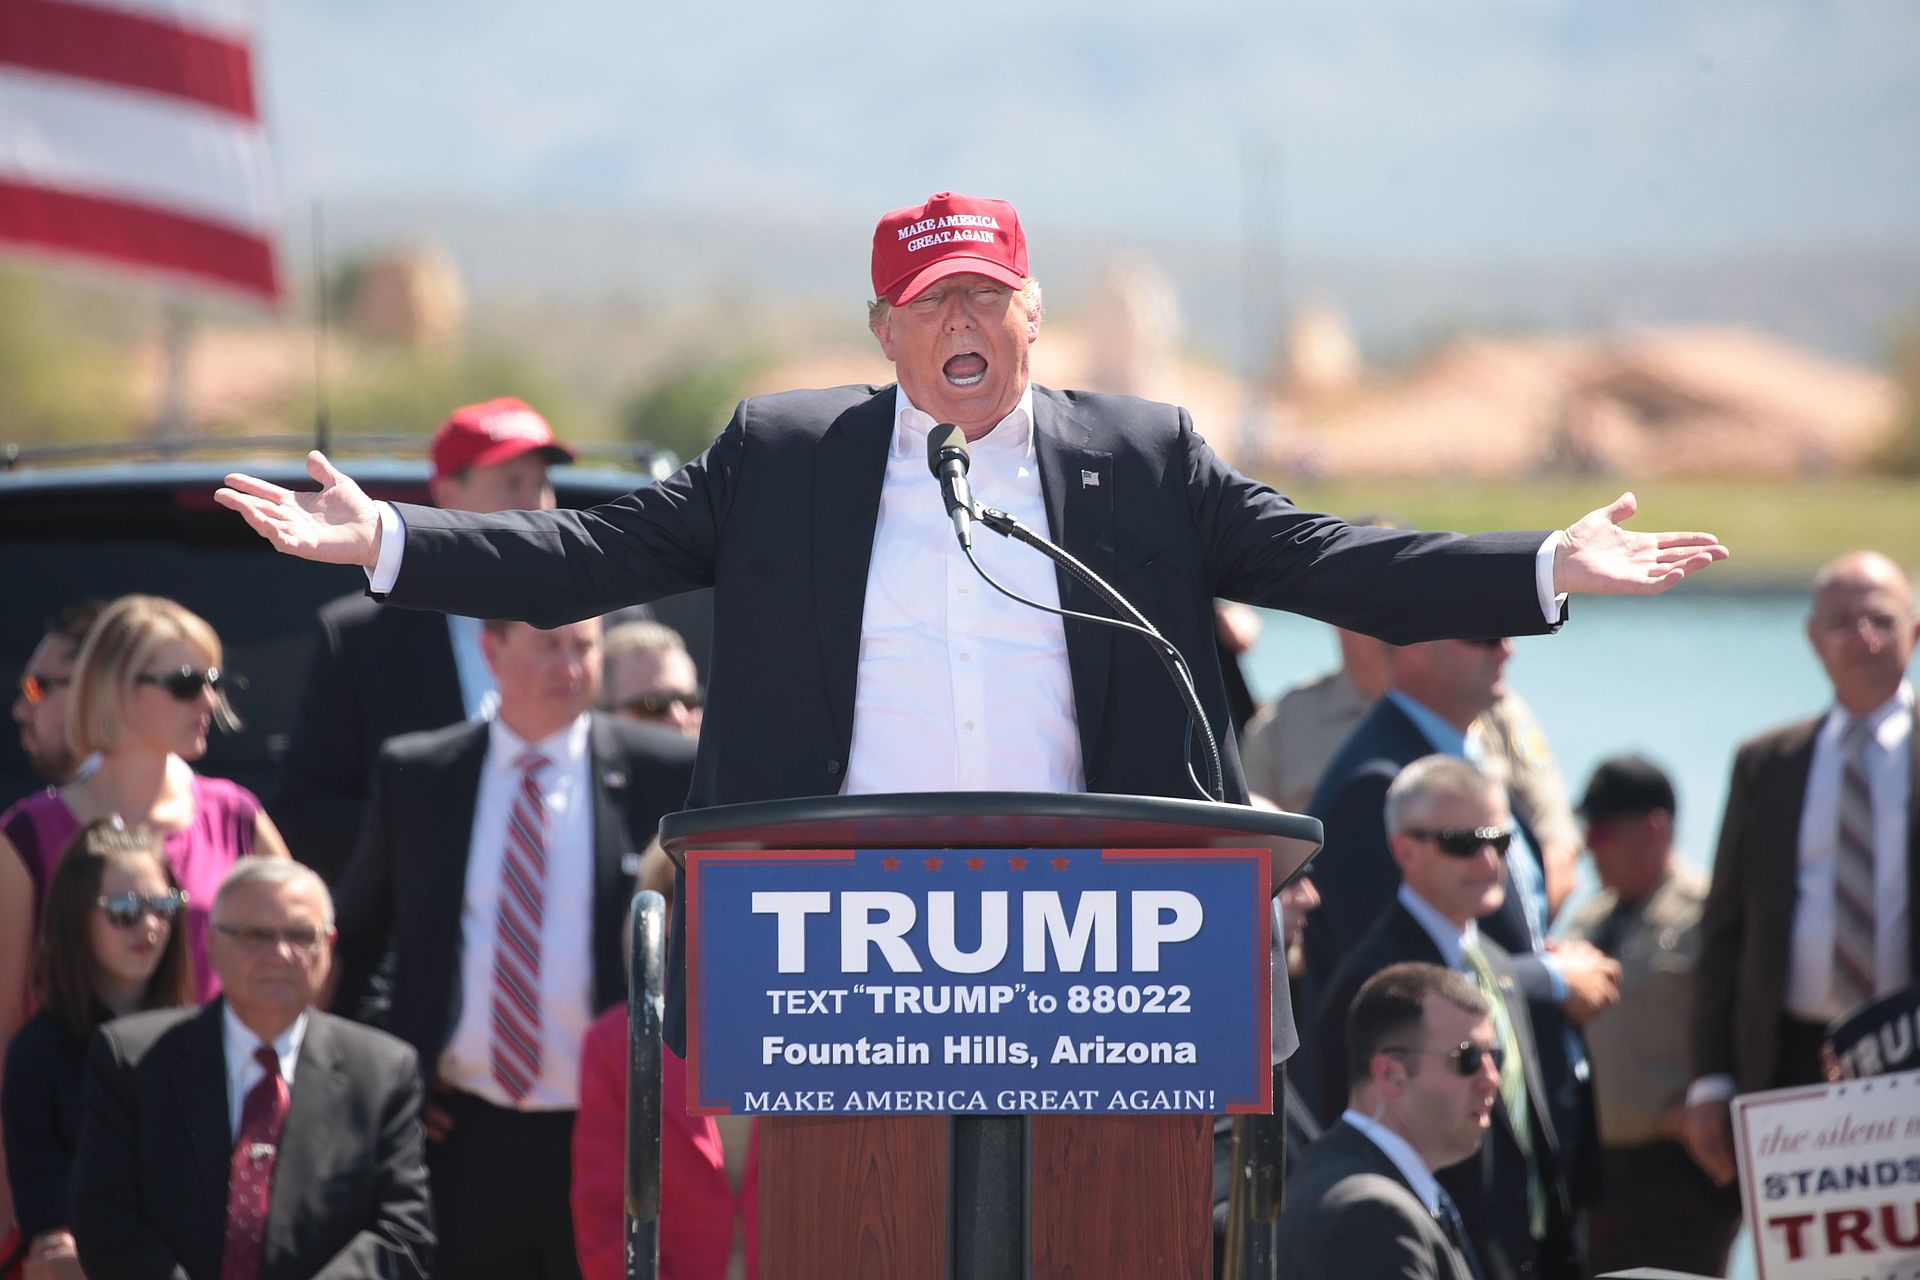 Candidate Donald Trump at a 2016 campaign rally in Arizona.